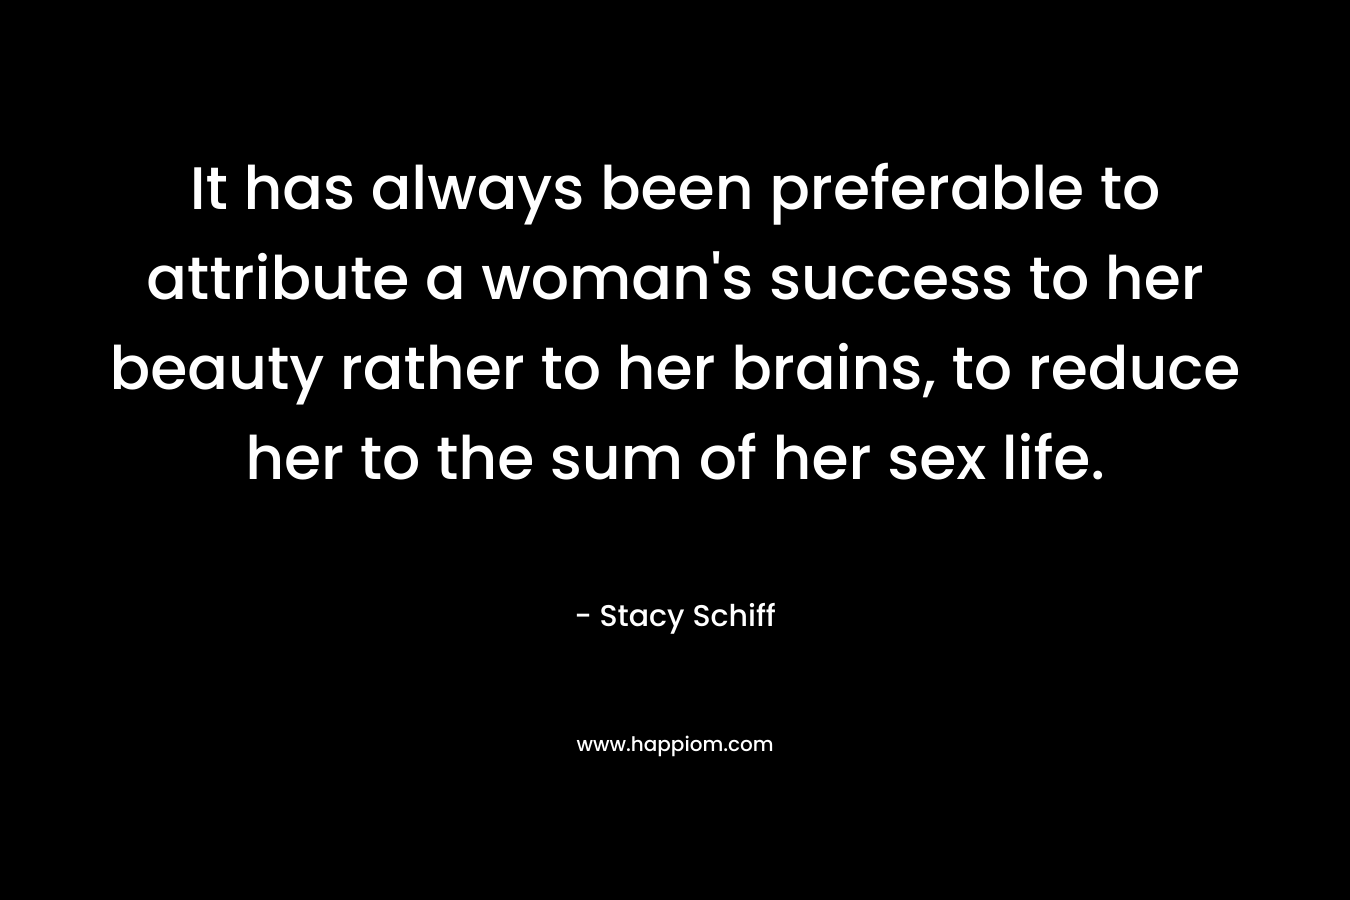 It has always been preferable to attribute a woman's success to her beauty rather to her brains, to reduce her to the sum of her sex life.